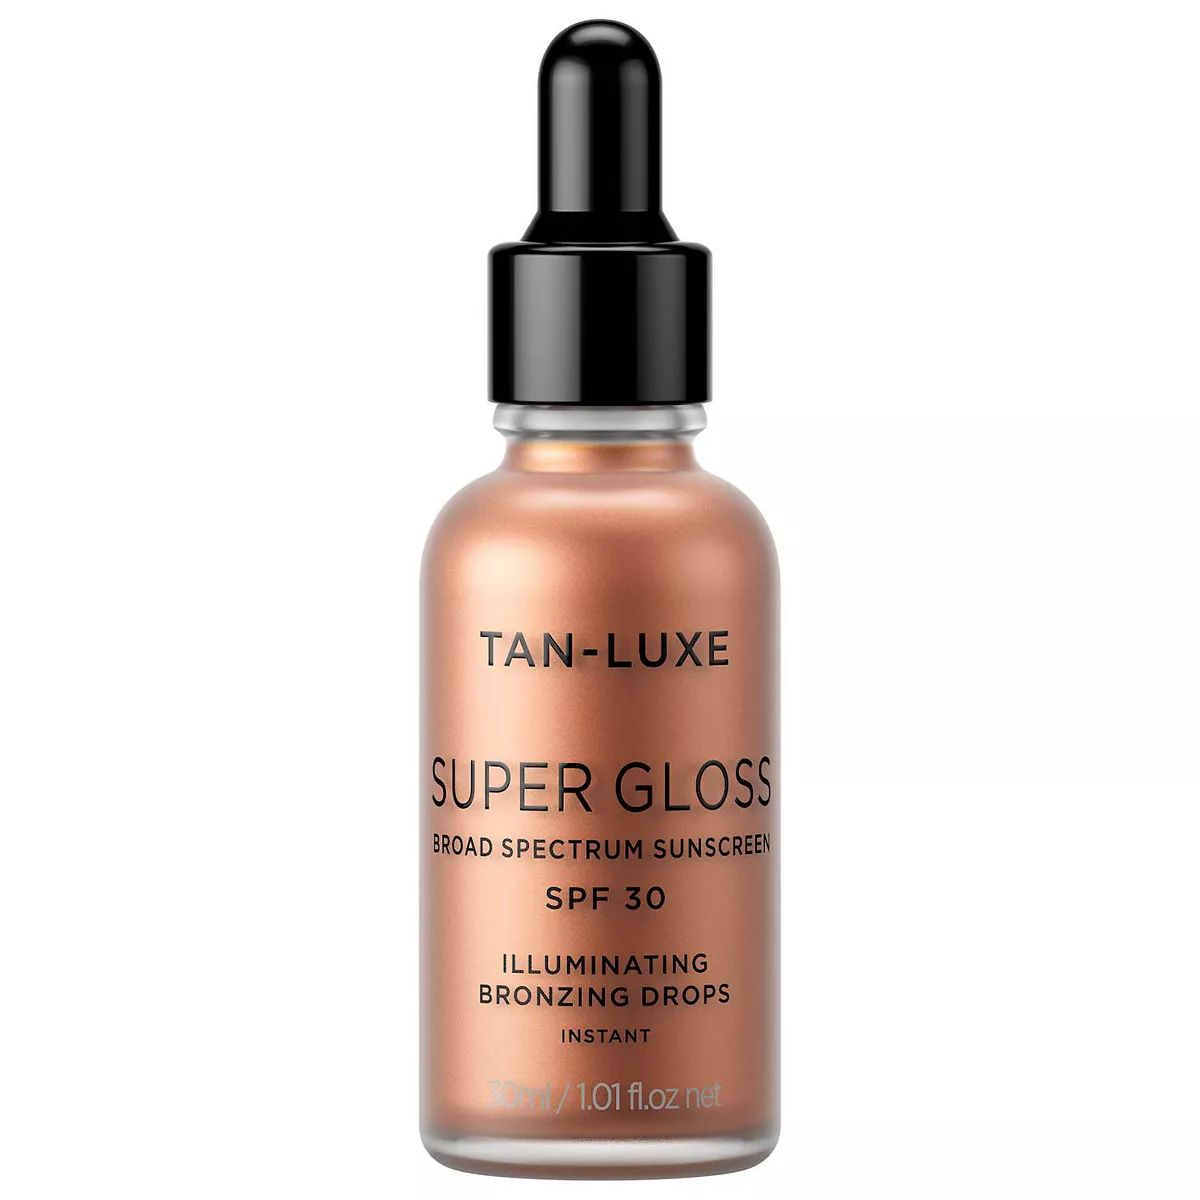 TAN-LUXE Super Gloss Instant Bronzing Face Drops with SPF 30 | Kohl's